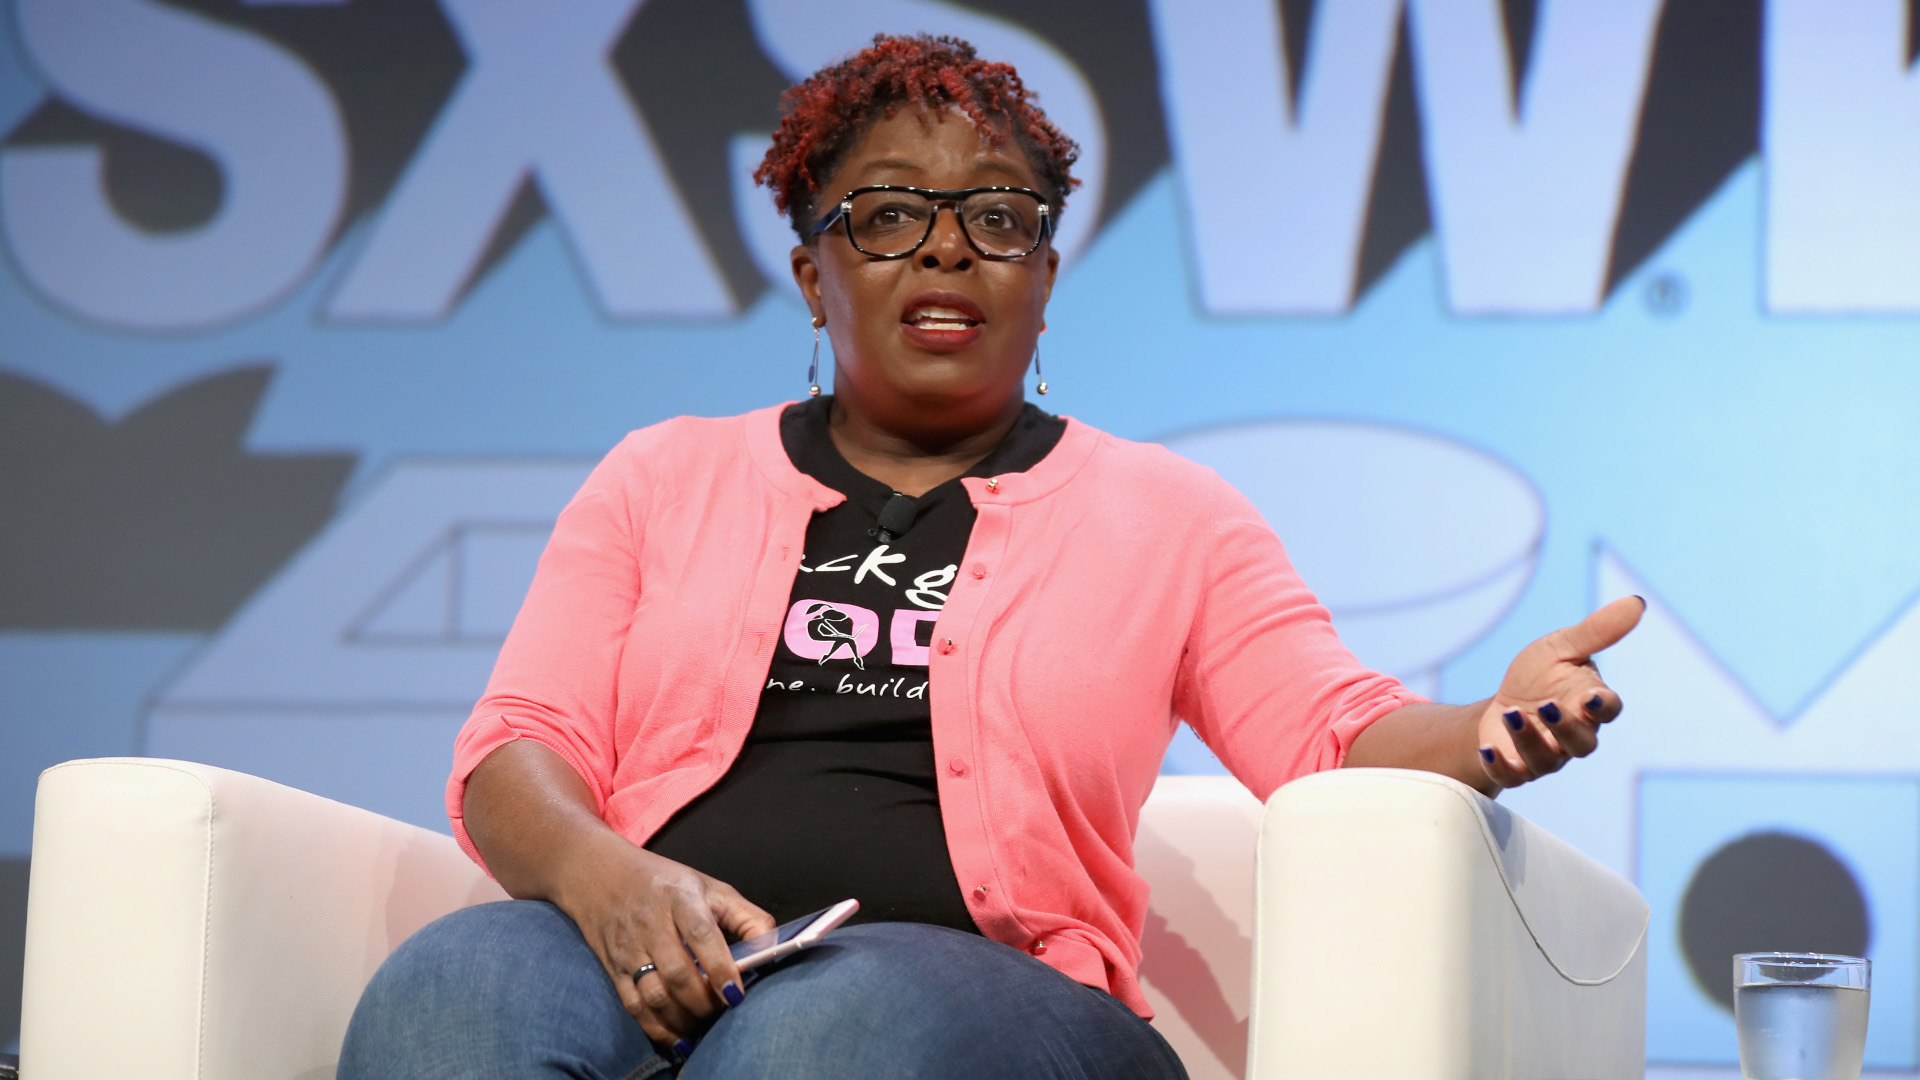 Black Girls Code CEO Kimberly Bryant Makes A Statement After Being Placed On Leave